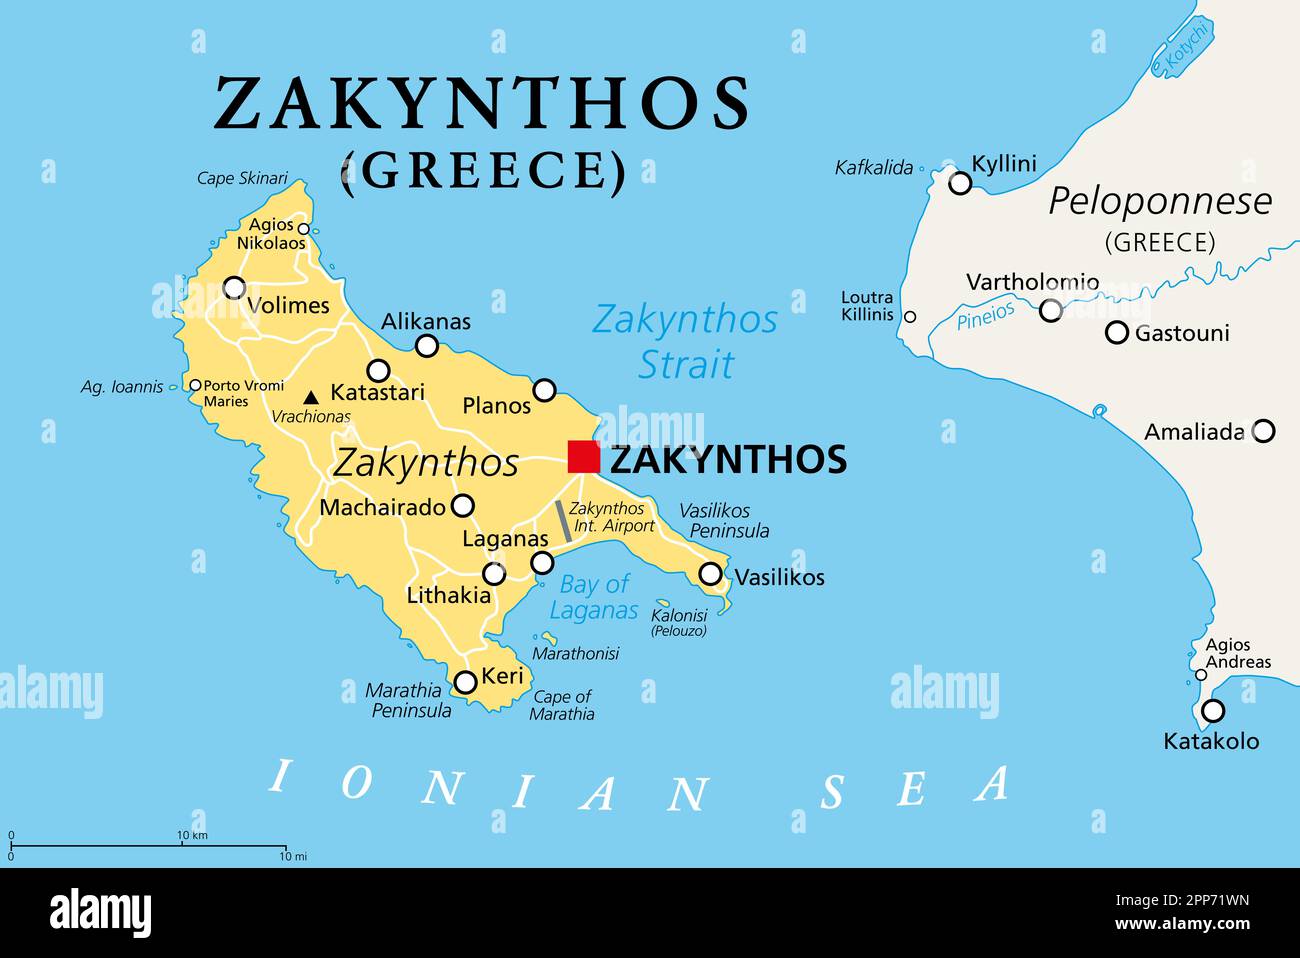 Zakynthos, Greek island, political map. Also known as Zakinthos or Zante, part of the Ionian Islands in Greece, and separate regional unit. Stock Photo